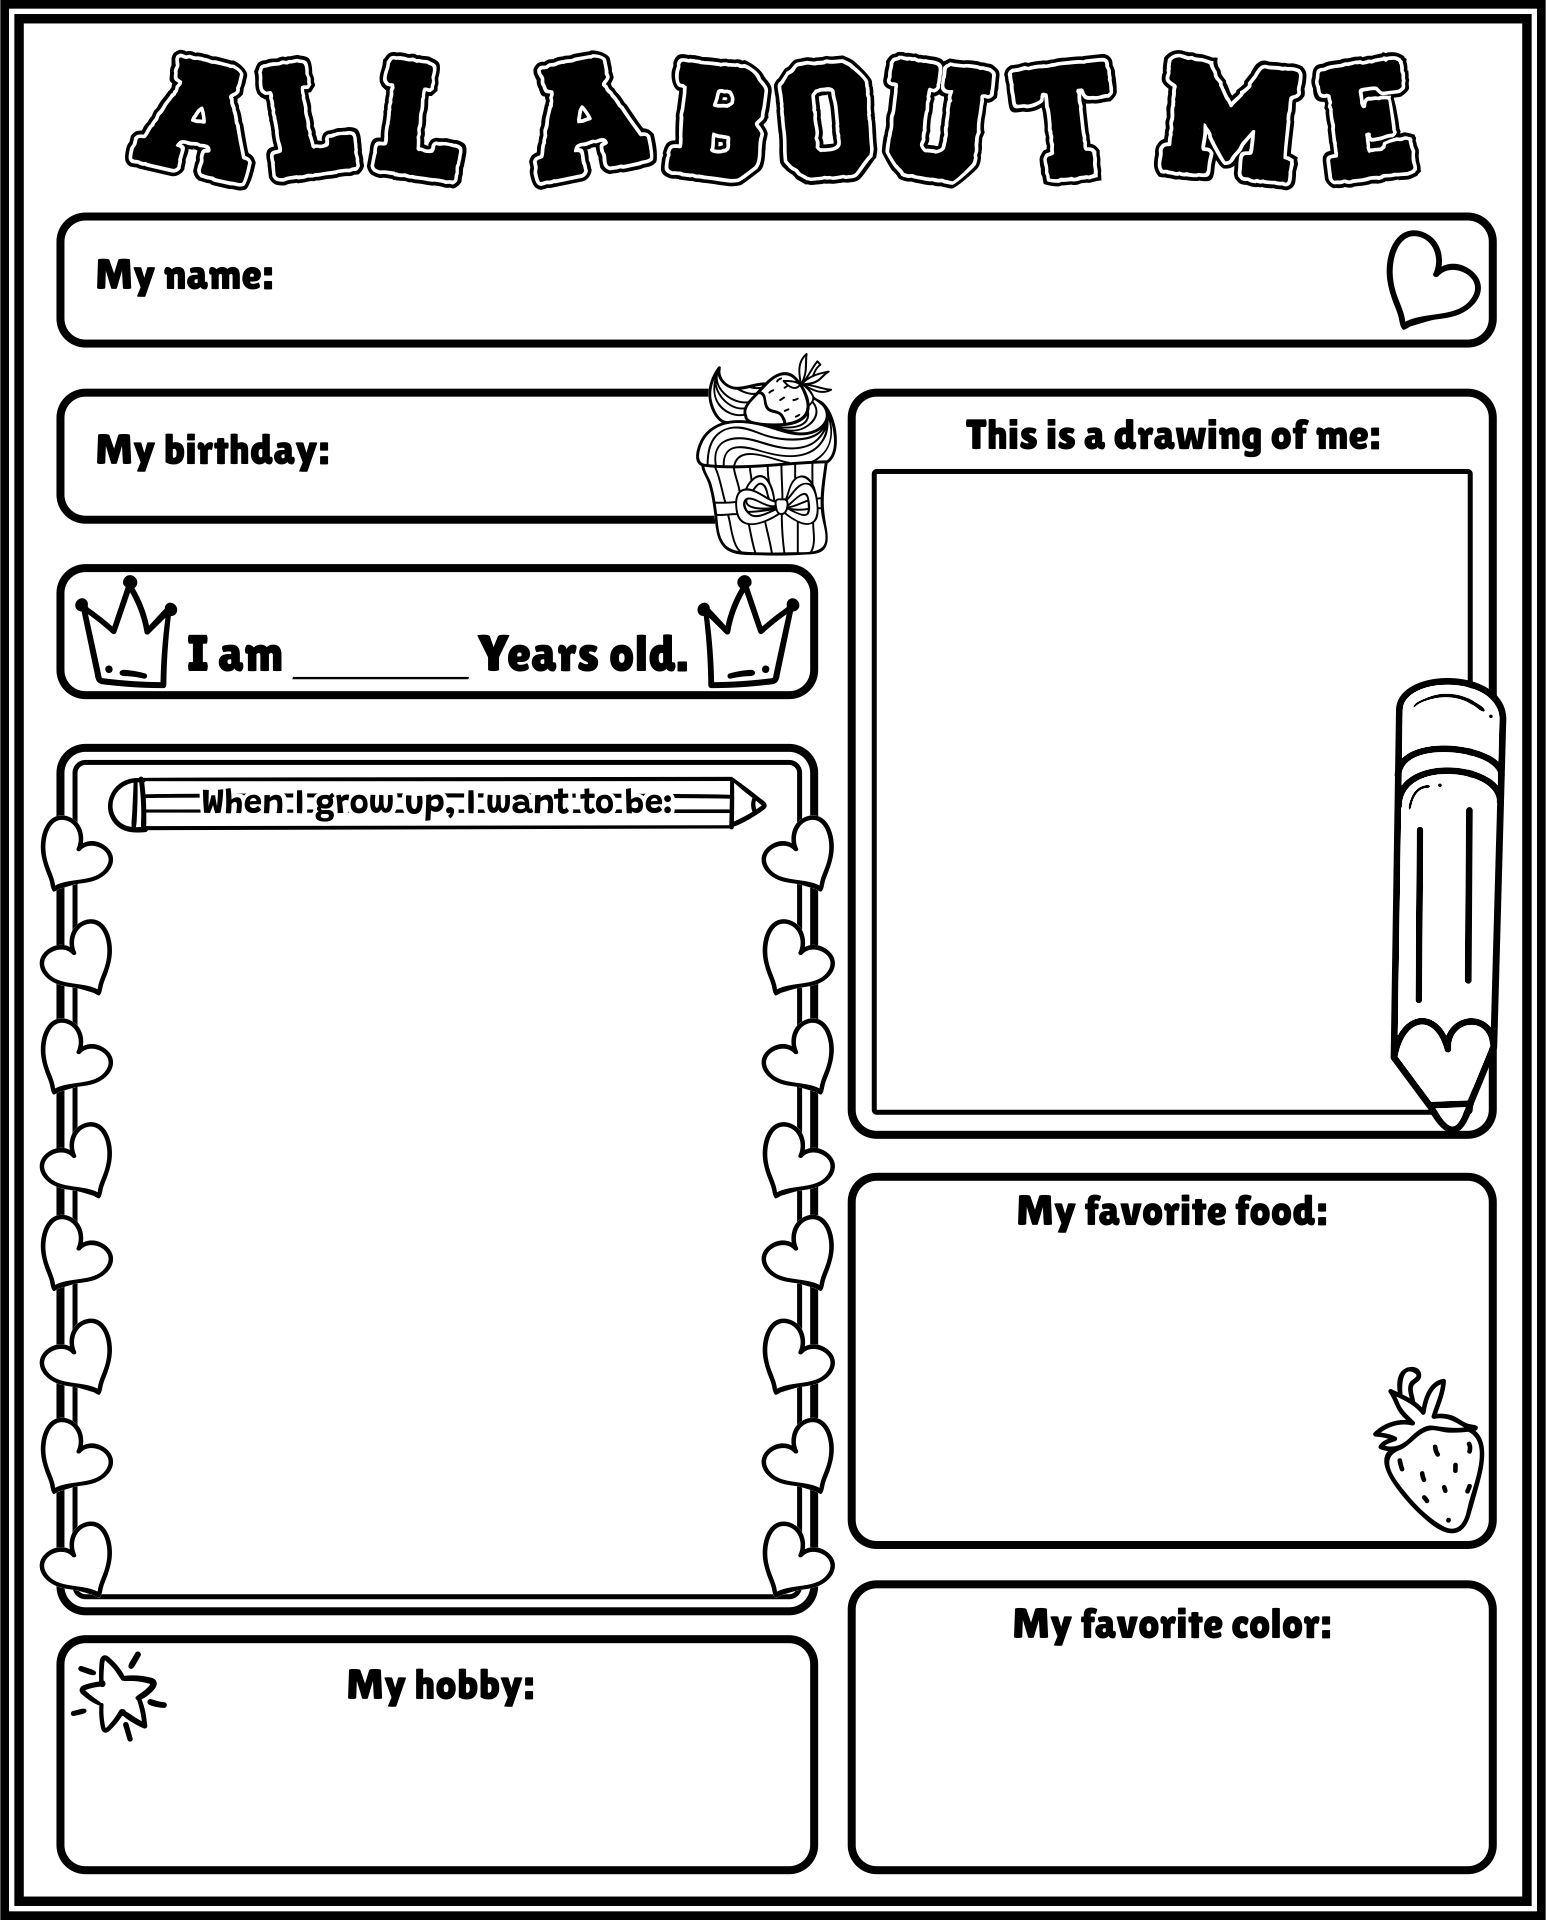 6 Best Images of All About Me Printable Template All About Me